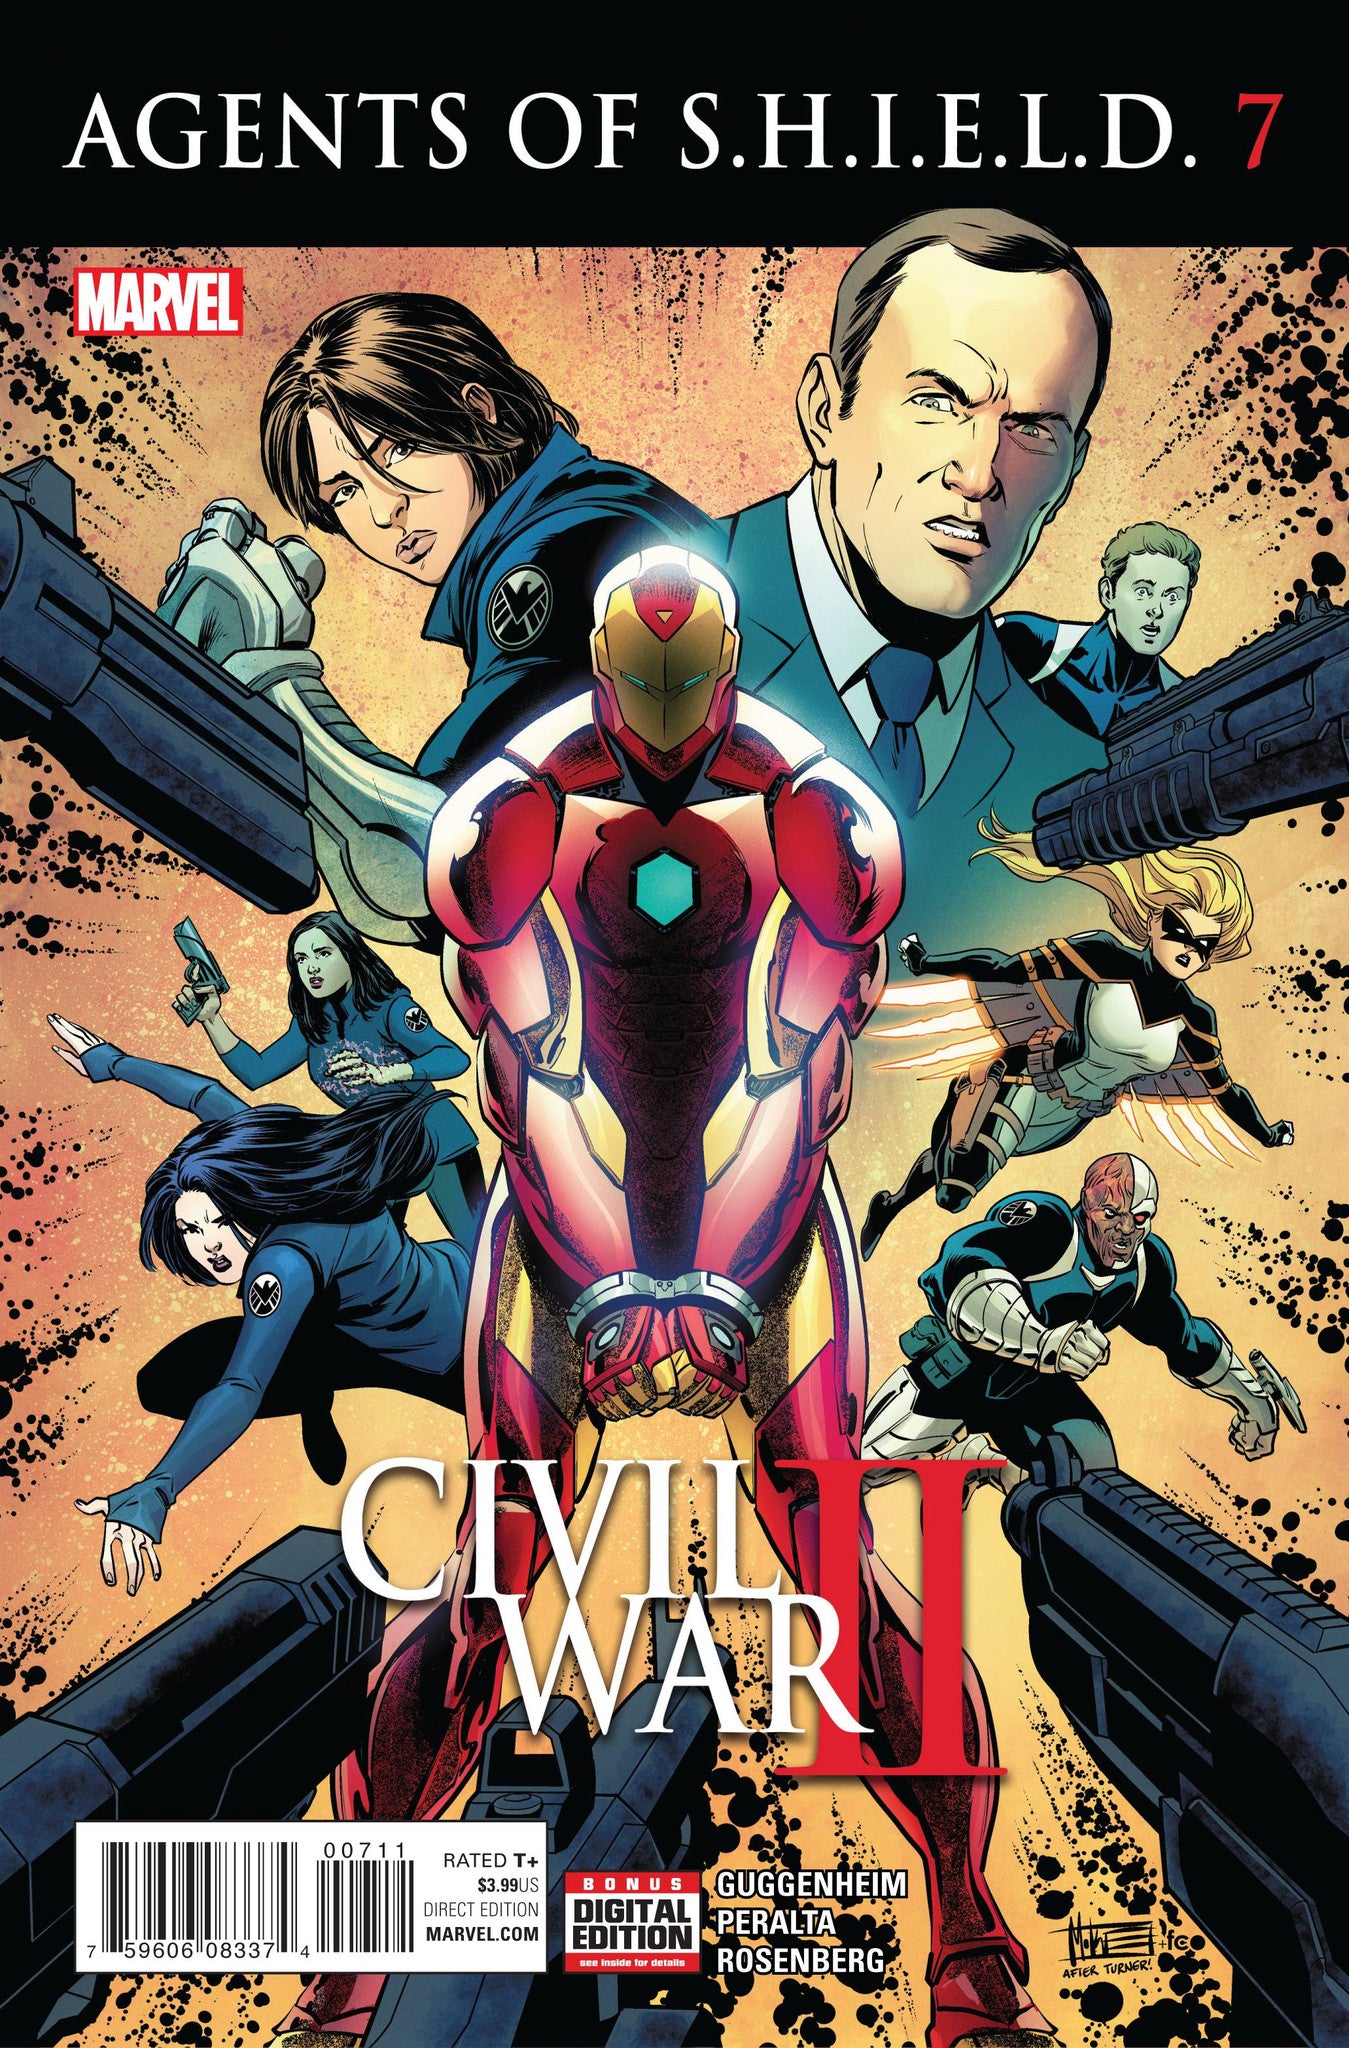 AGENTS OF SHIELD #7 CW2 COVER